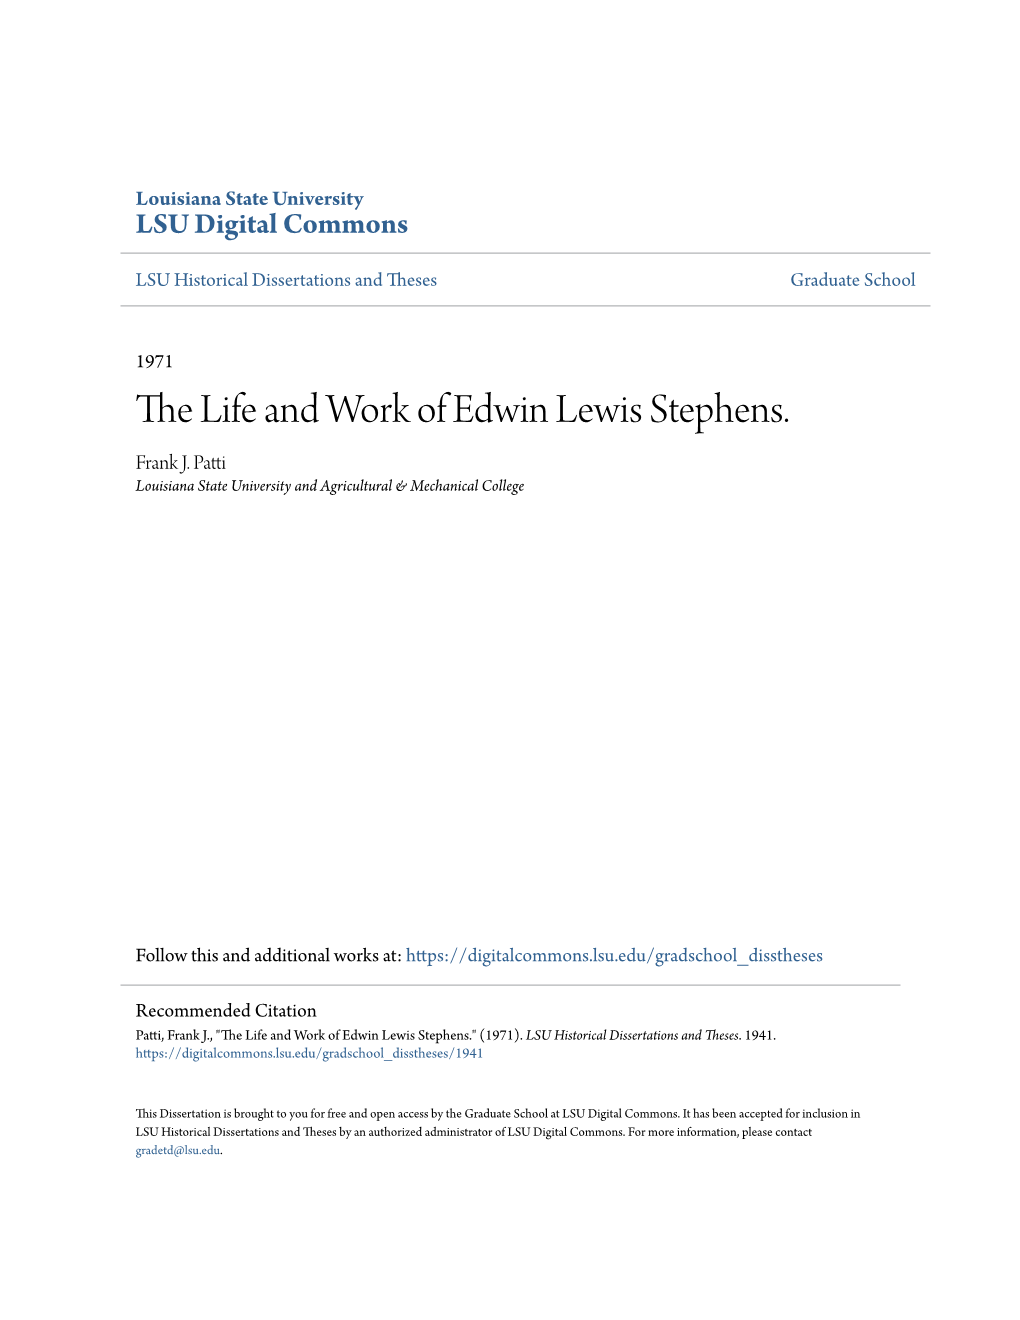 The Life and Work of Edwin Lewis Stephens. Frank J